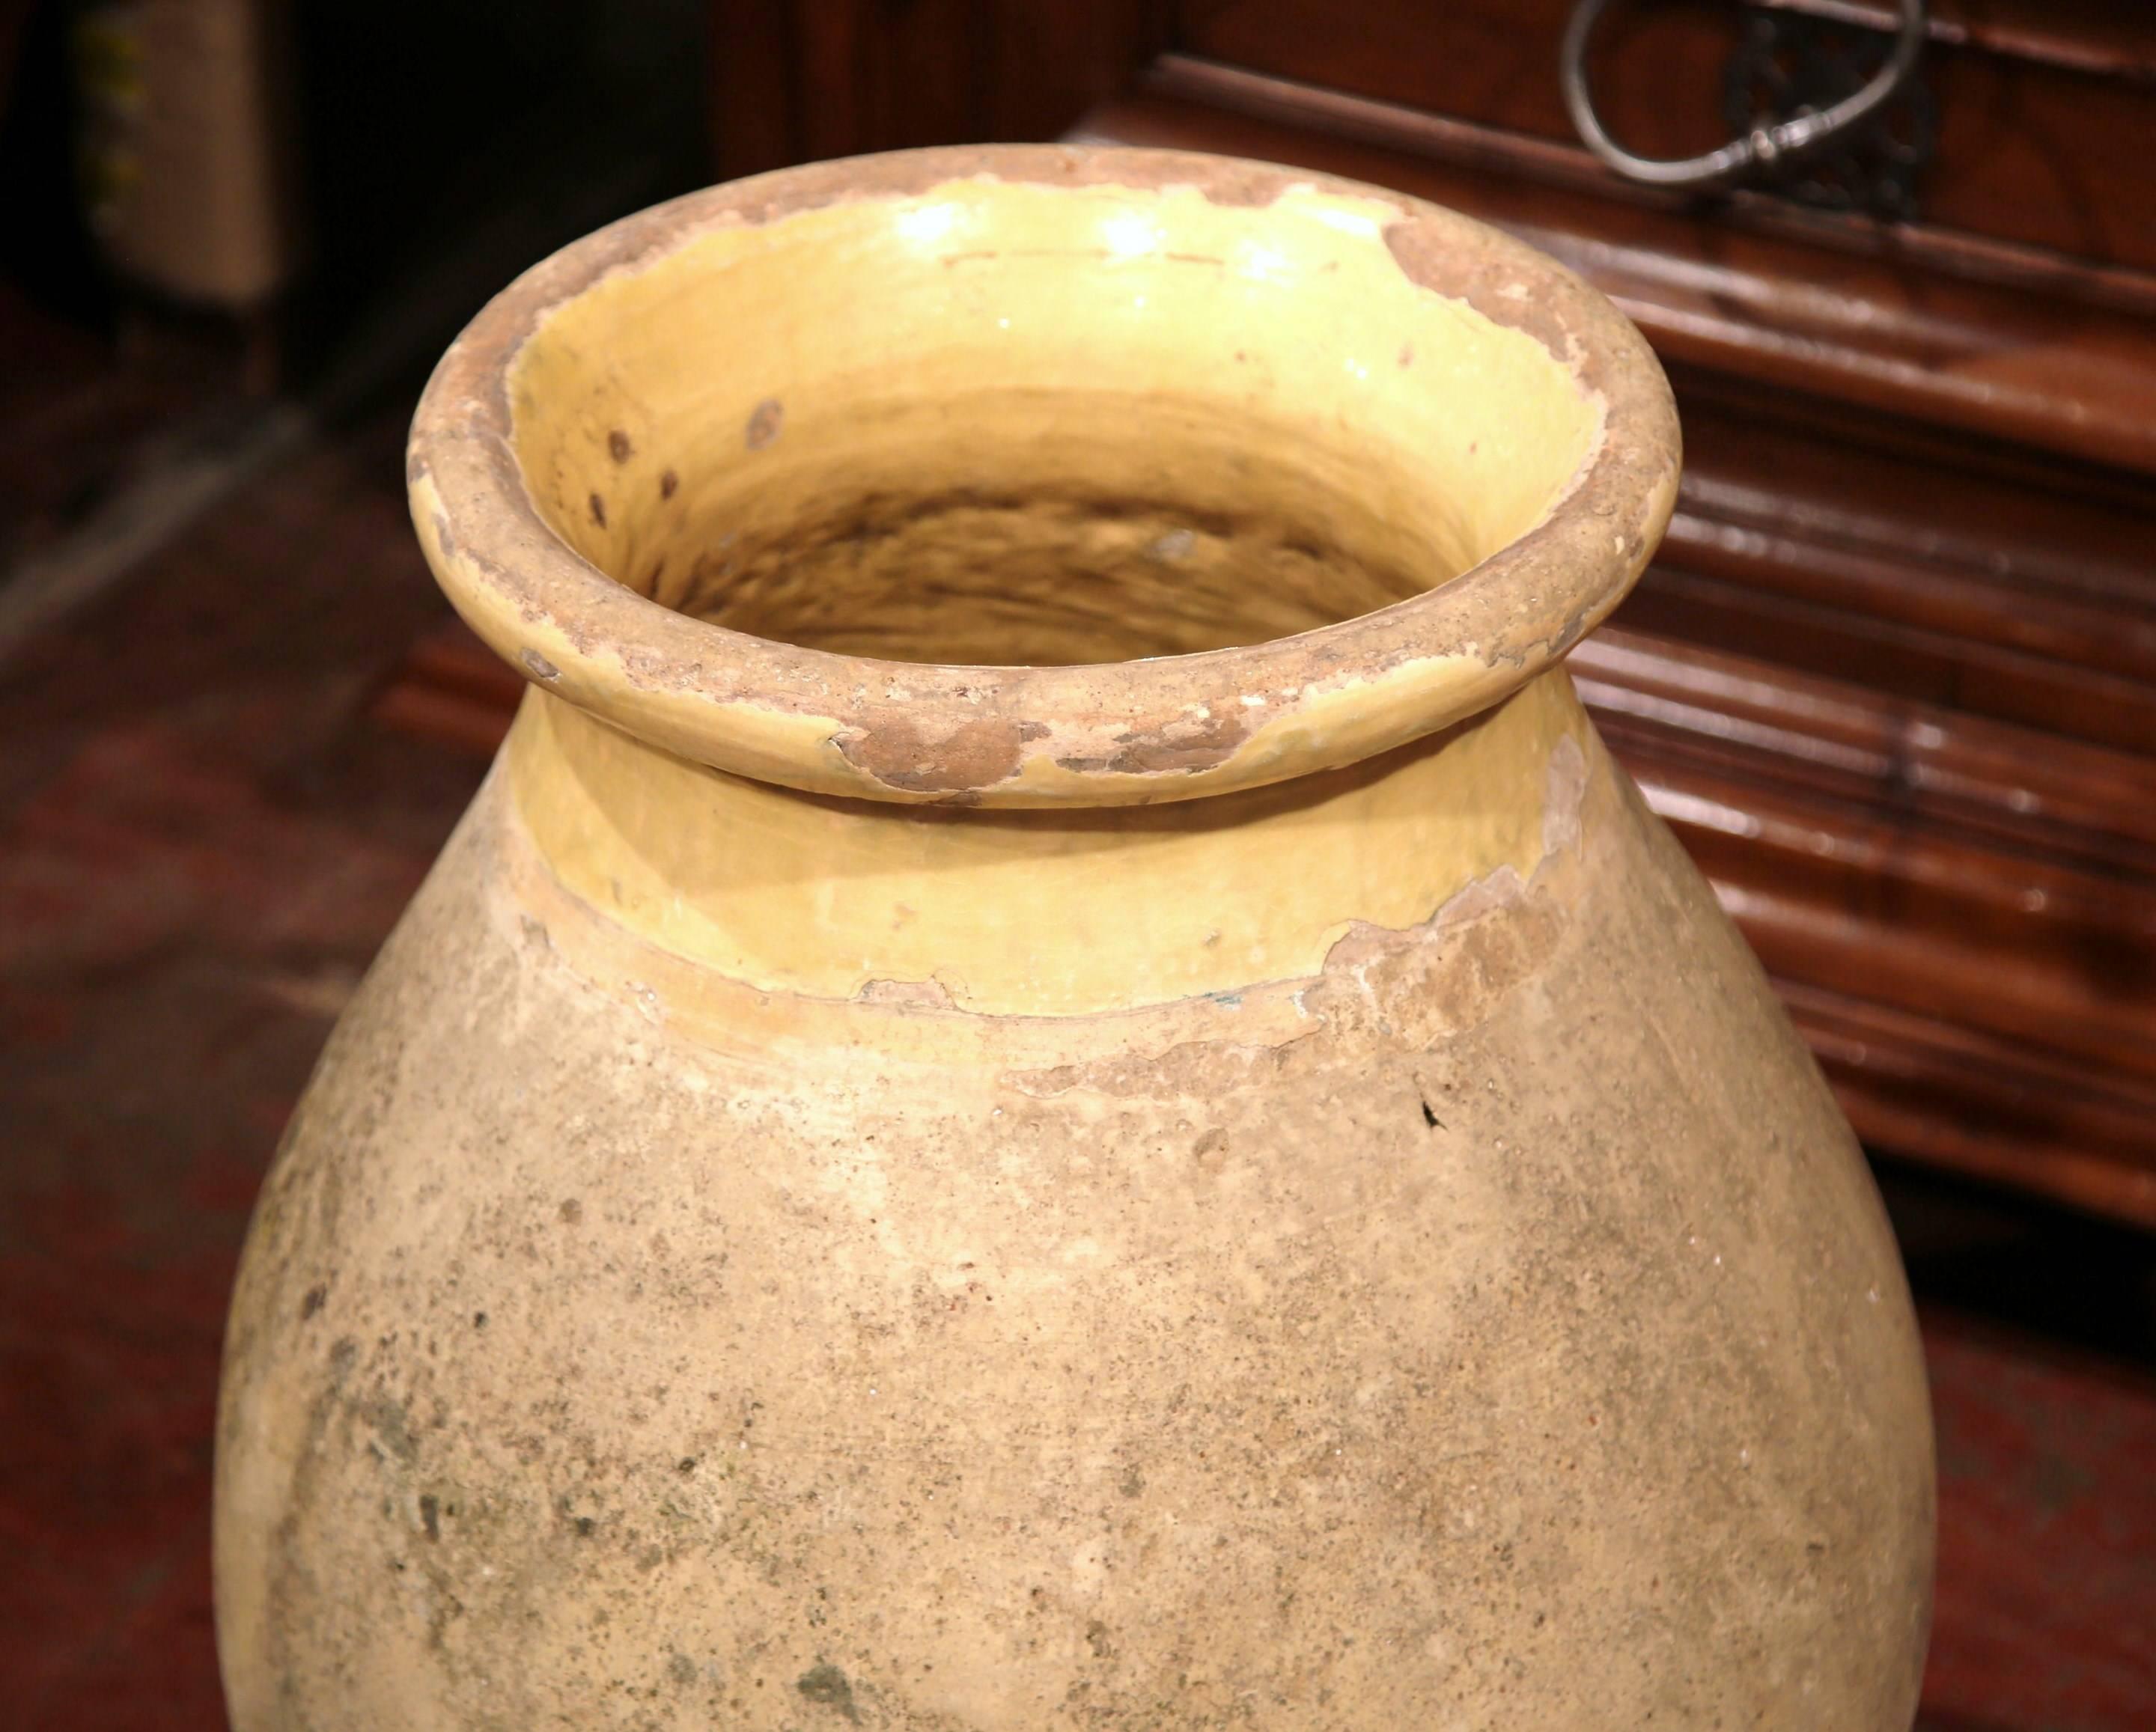 This beautiful, antique earthenware olive jar was created in southern France, circa 1880. The jar has a traditional round shape and a gracefully handmade quality. The large pot has a neutral, yellow glaze around the neck and trim, and a natural